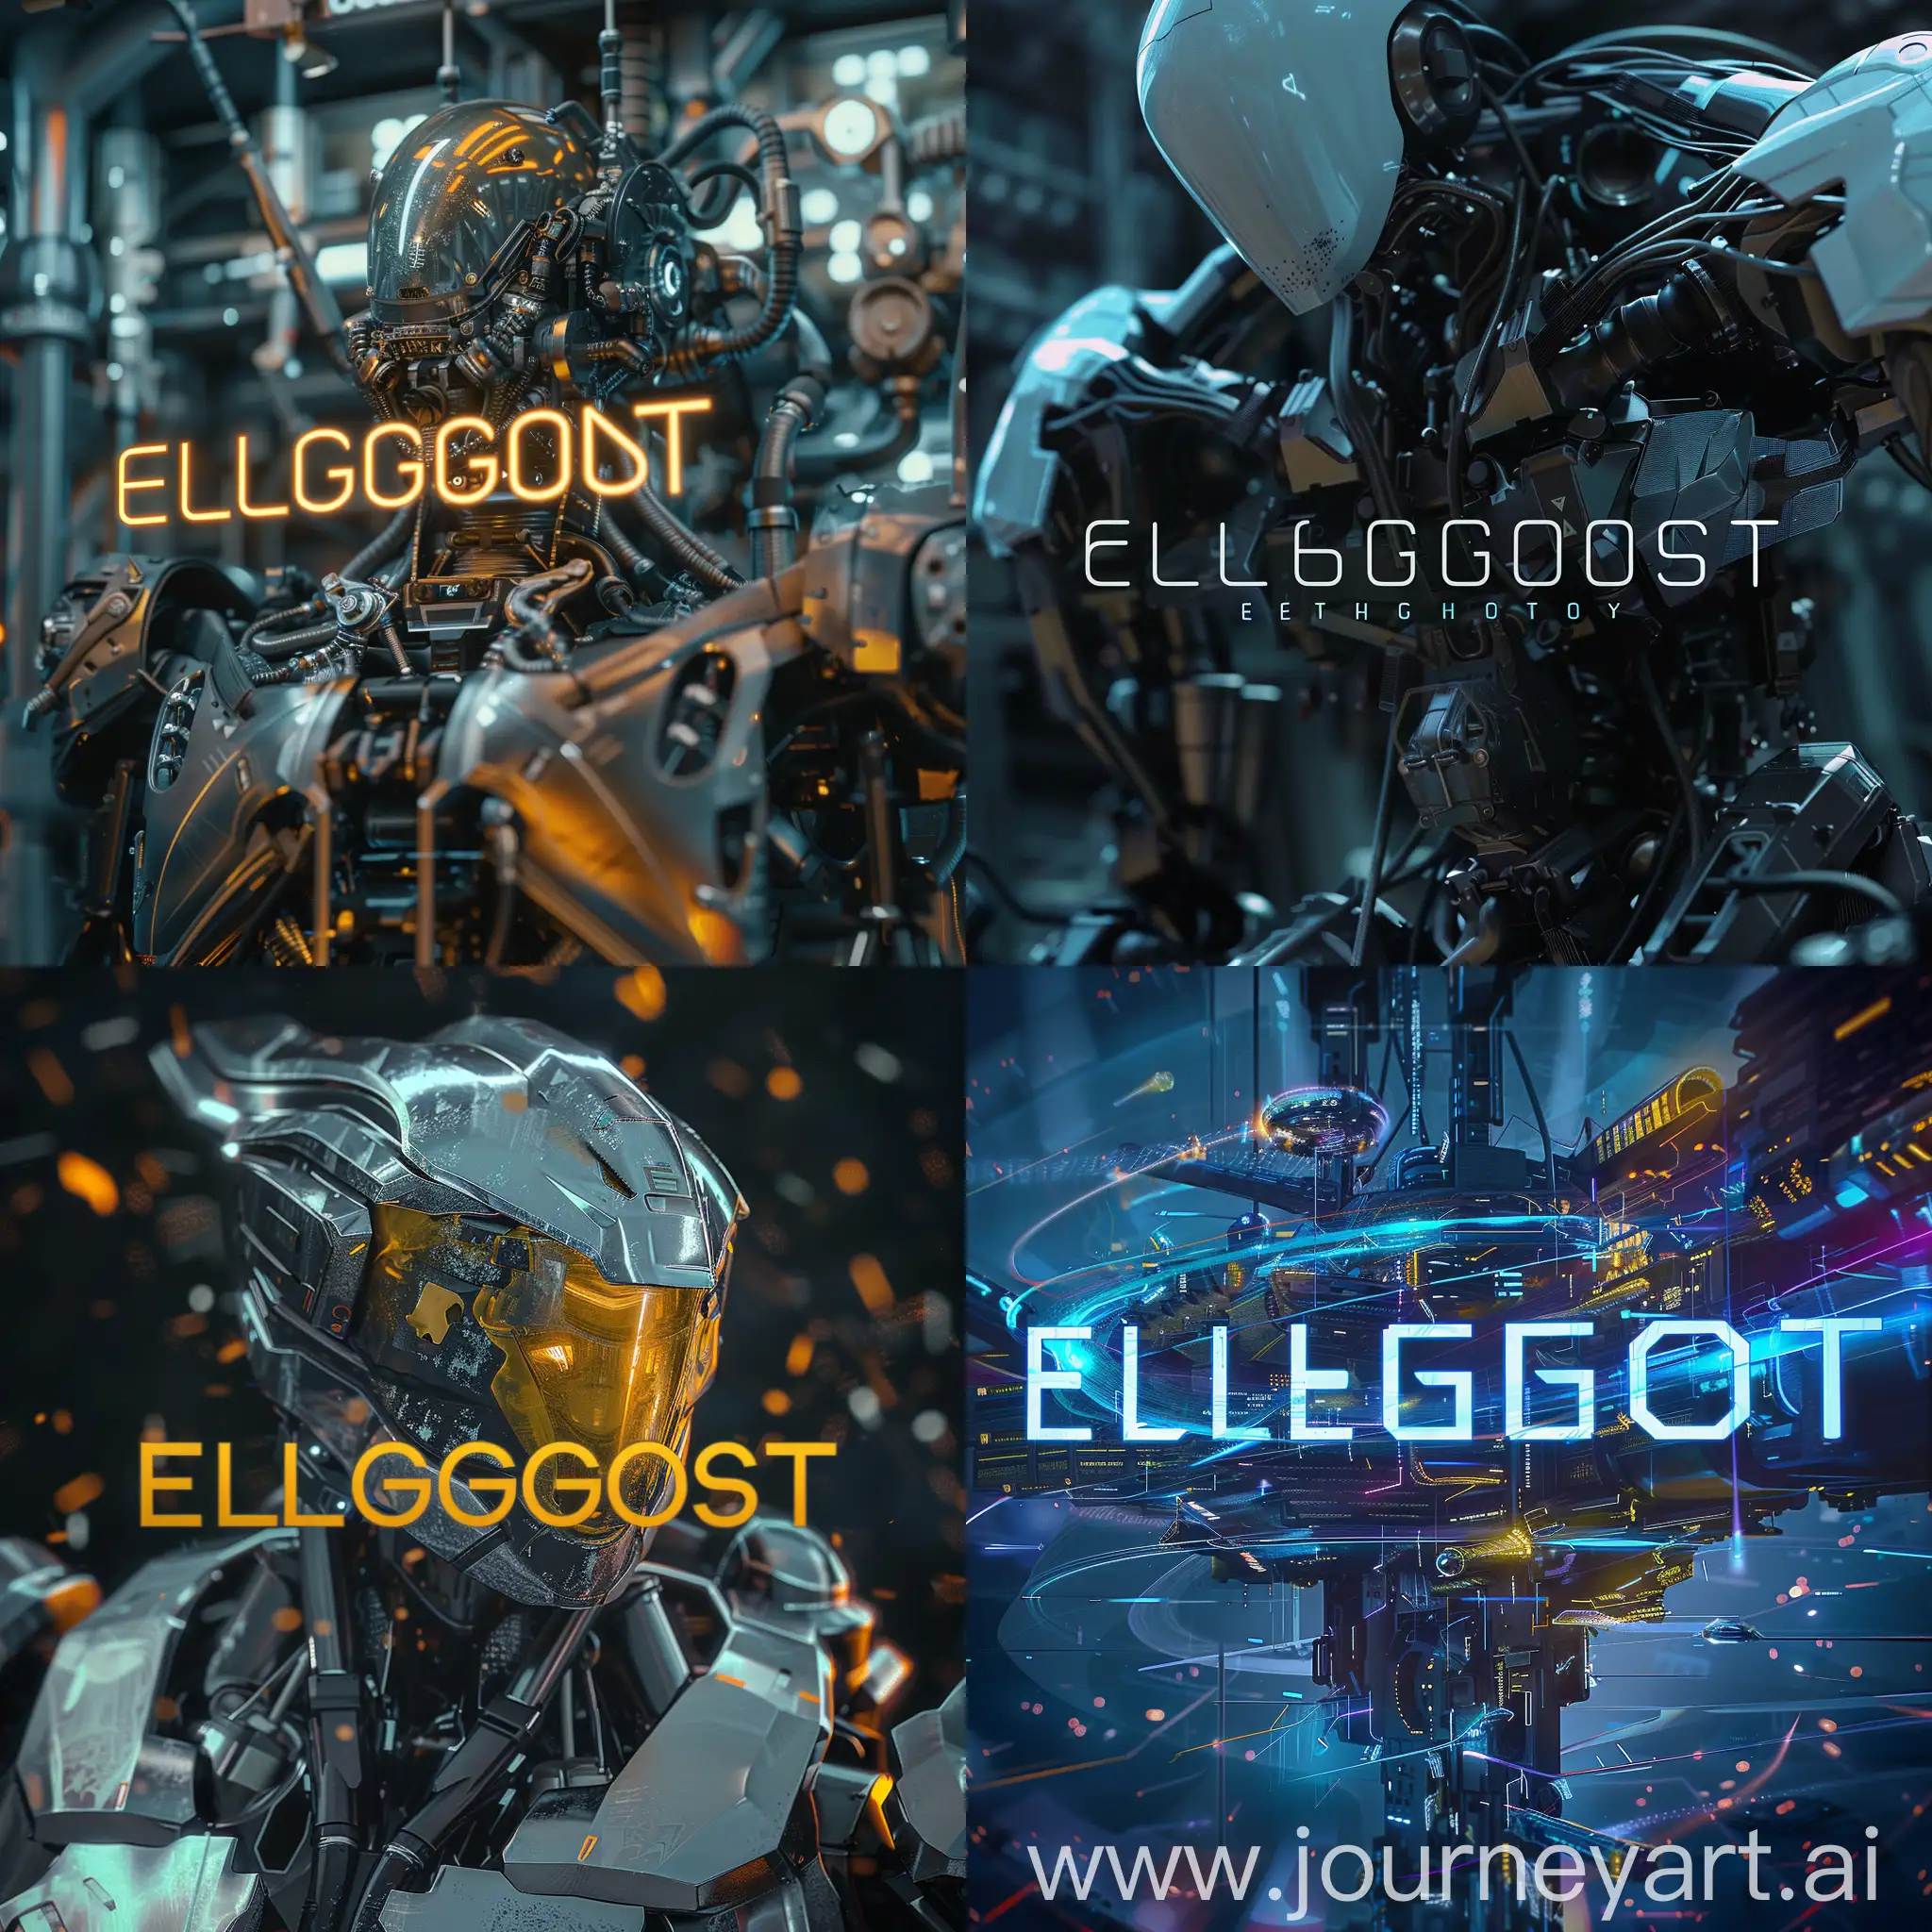 the words "ELGHOST" with a futuristic, modern, mecha theme, text only